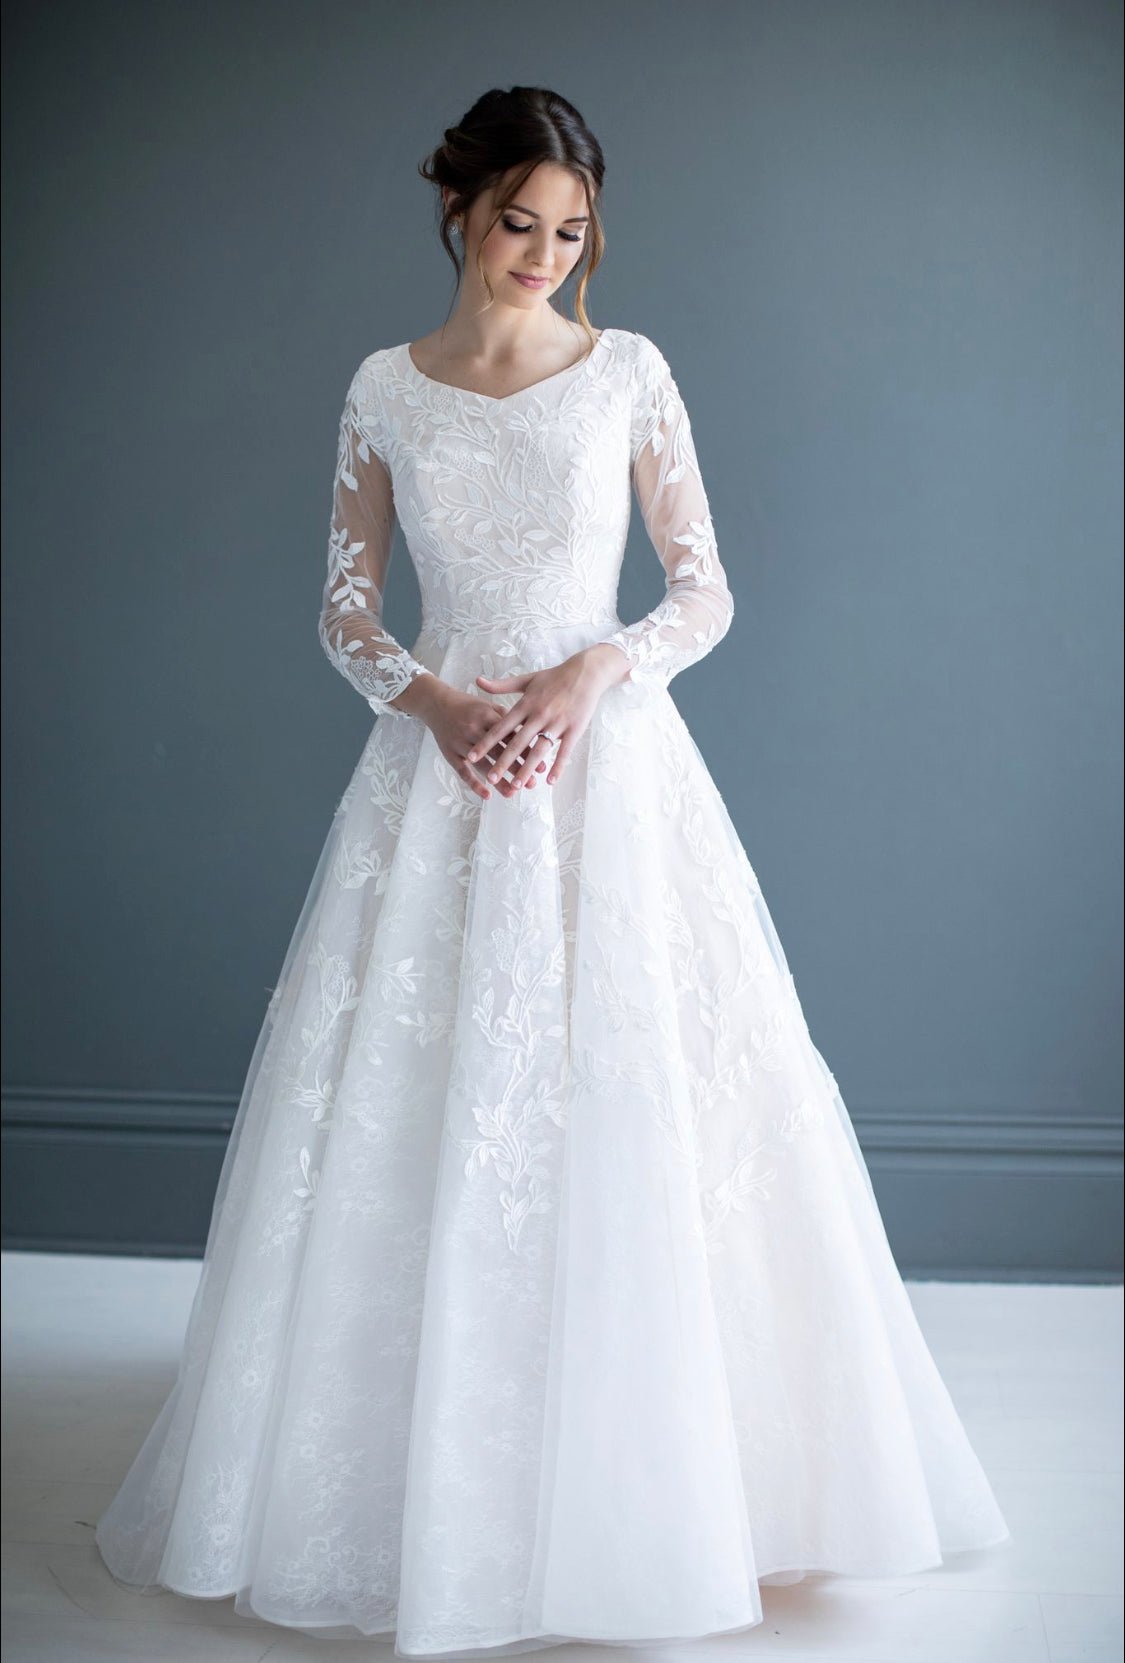 The Modest Bridal Collection by Barbie, Modern Bride - Emily